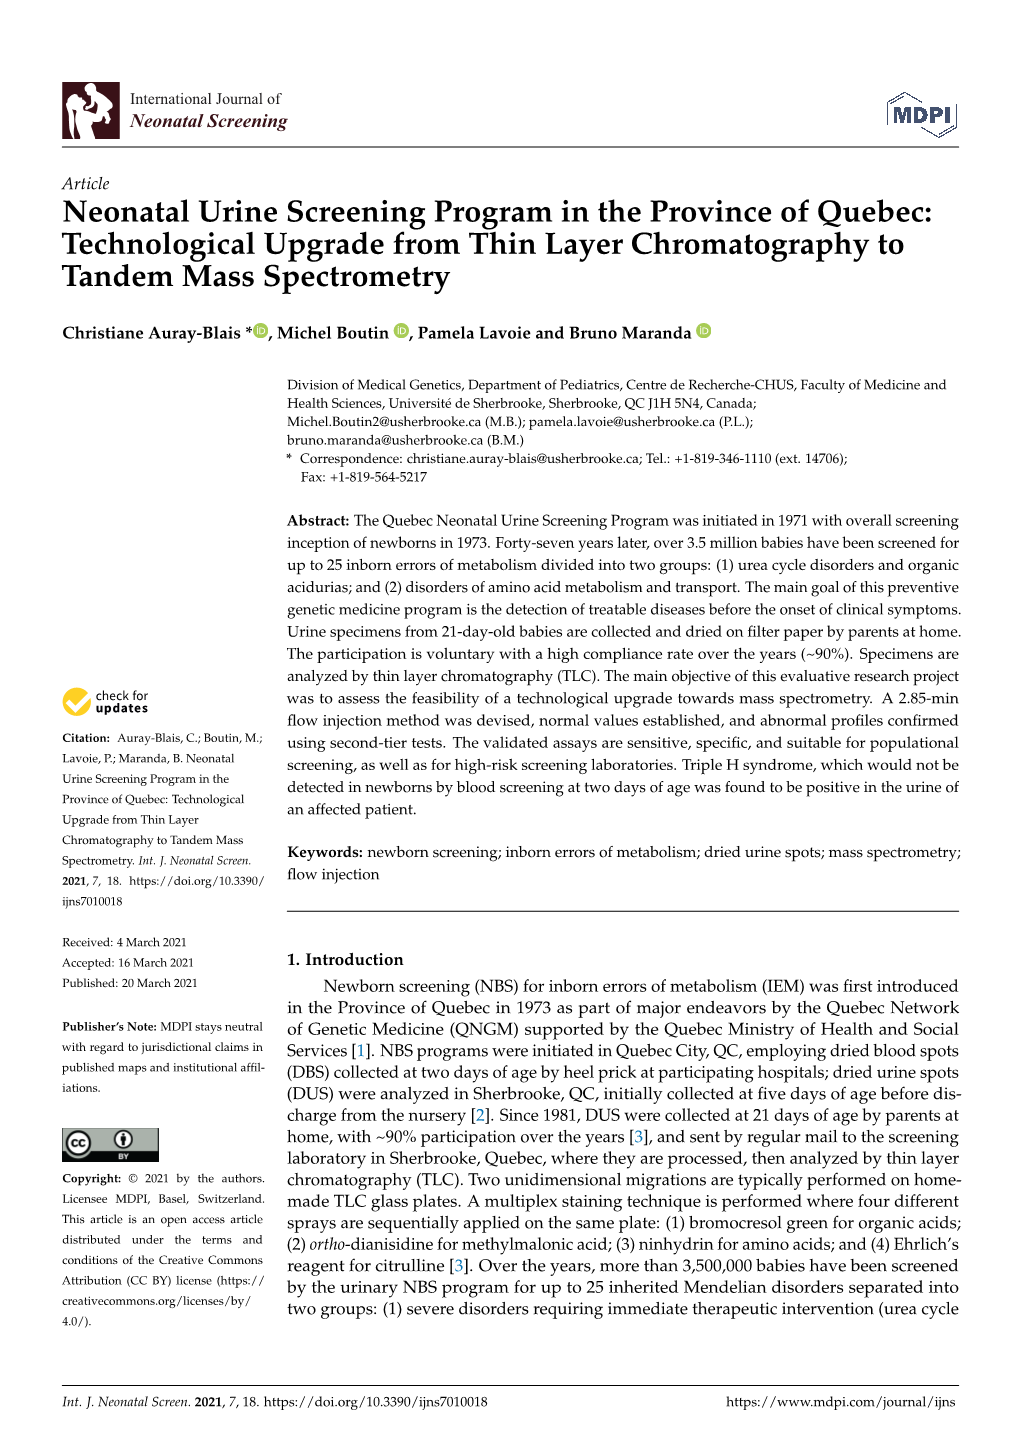 Neonatal Urine Screening Program in the Province of Quebec: Technological Upgrade from Thin Layer Chromatography to Tandem Mass Spectrometry